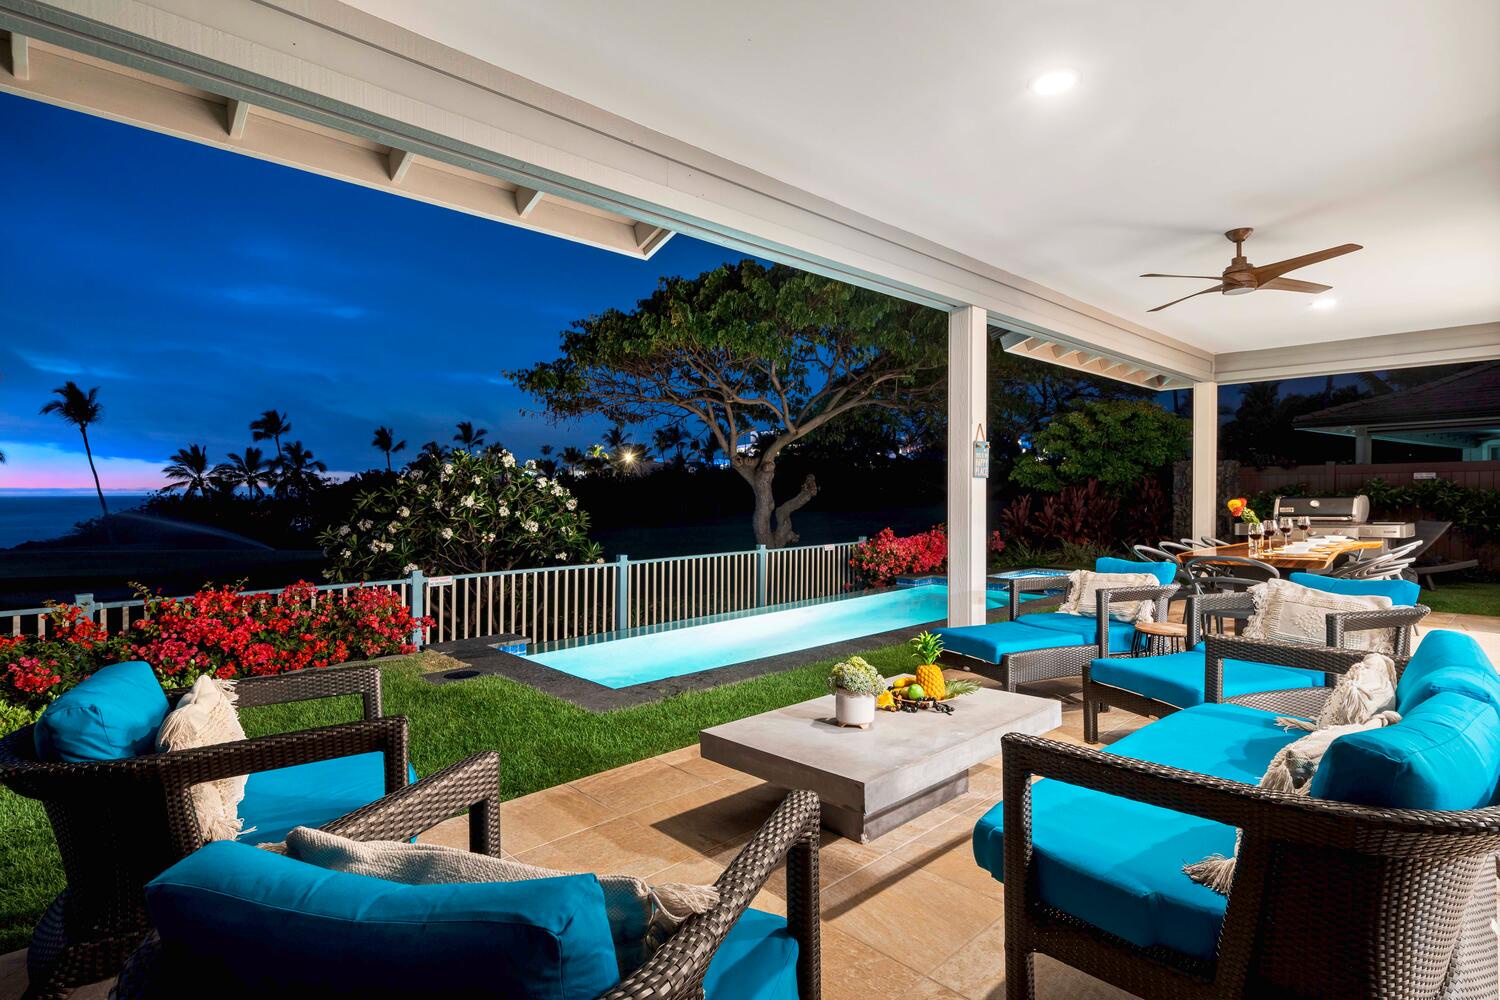 Kailua-Kona Vacation Rentals, Holua Kai #26 - Nighttime view of a poolside lanai with vibrant seating and soft lighting, ideal for evening relaxation.